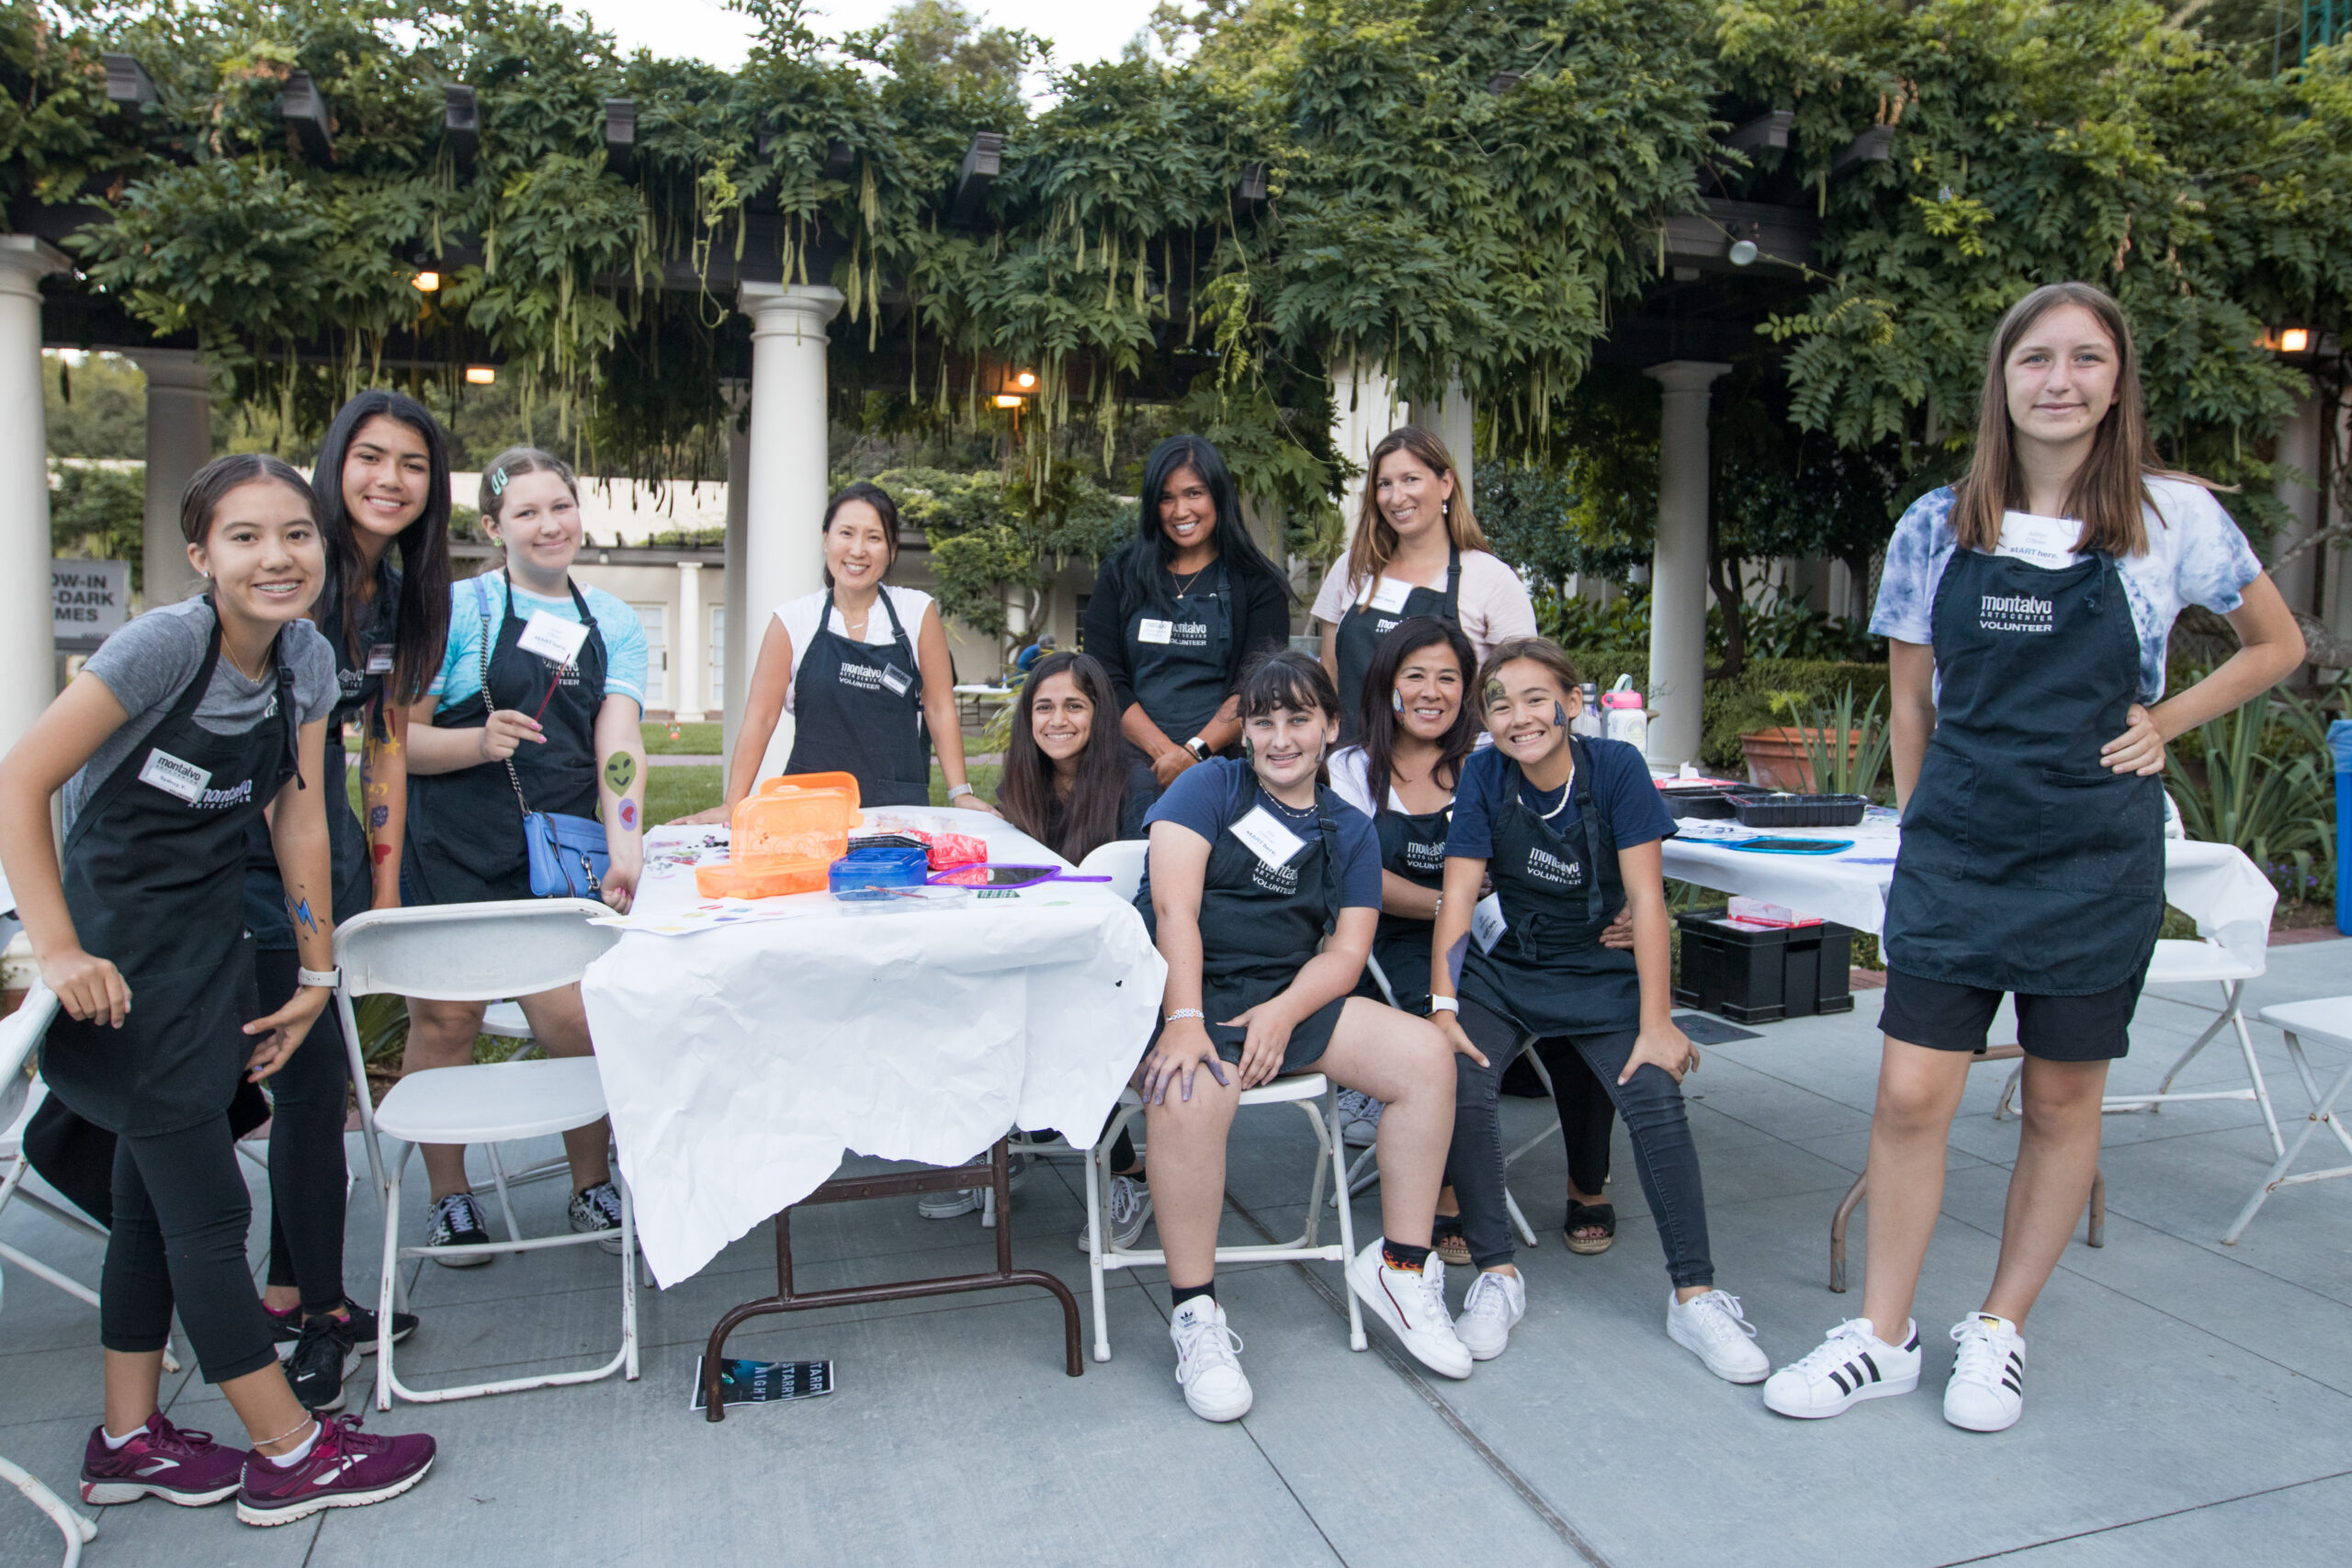 Image: A group of young women wearing black aprons reading “Montalvo Volunteers” gather in a garden